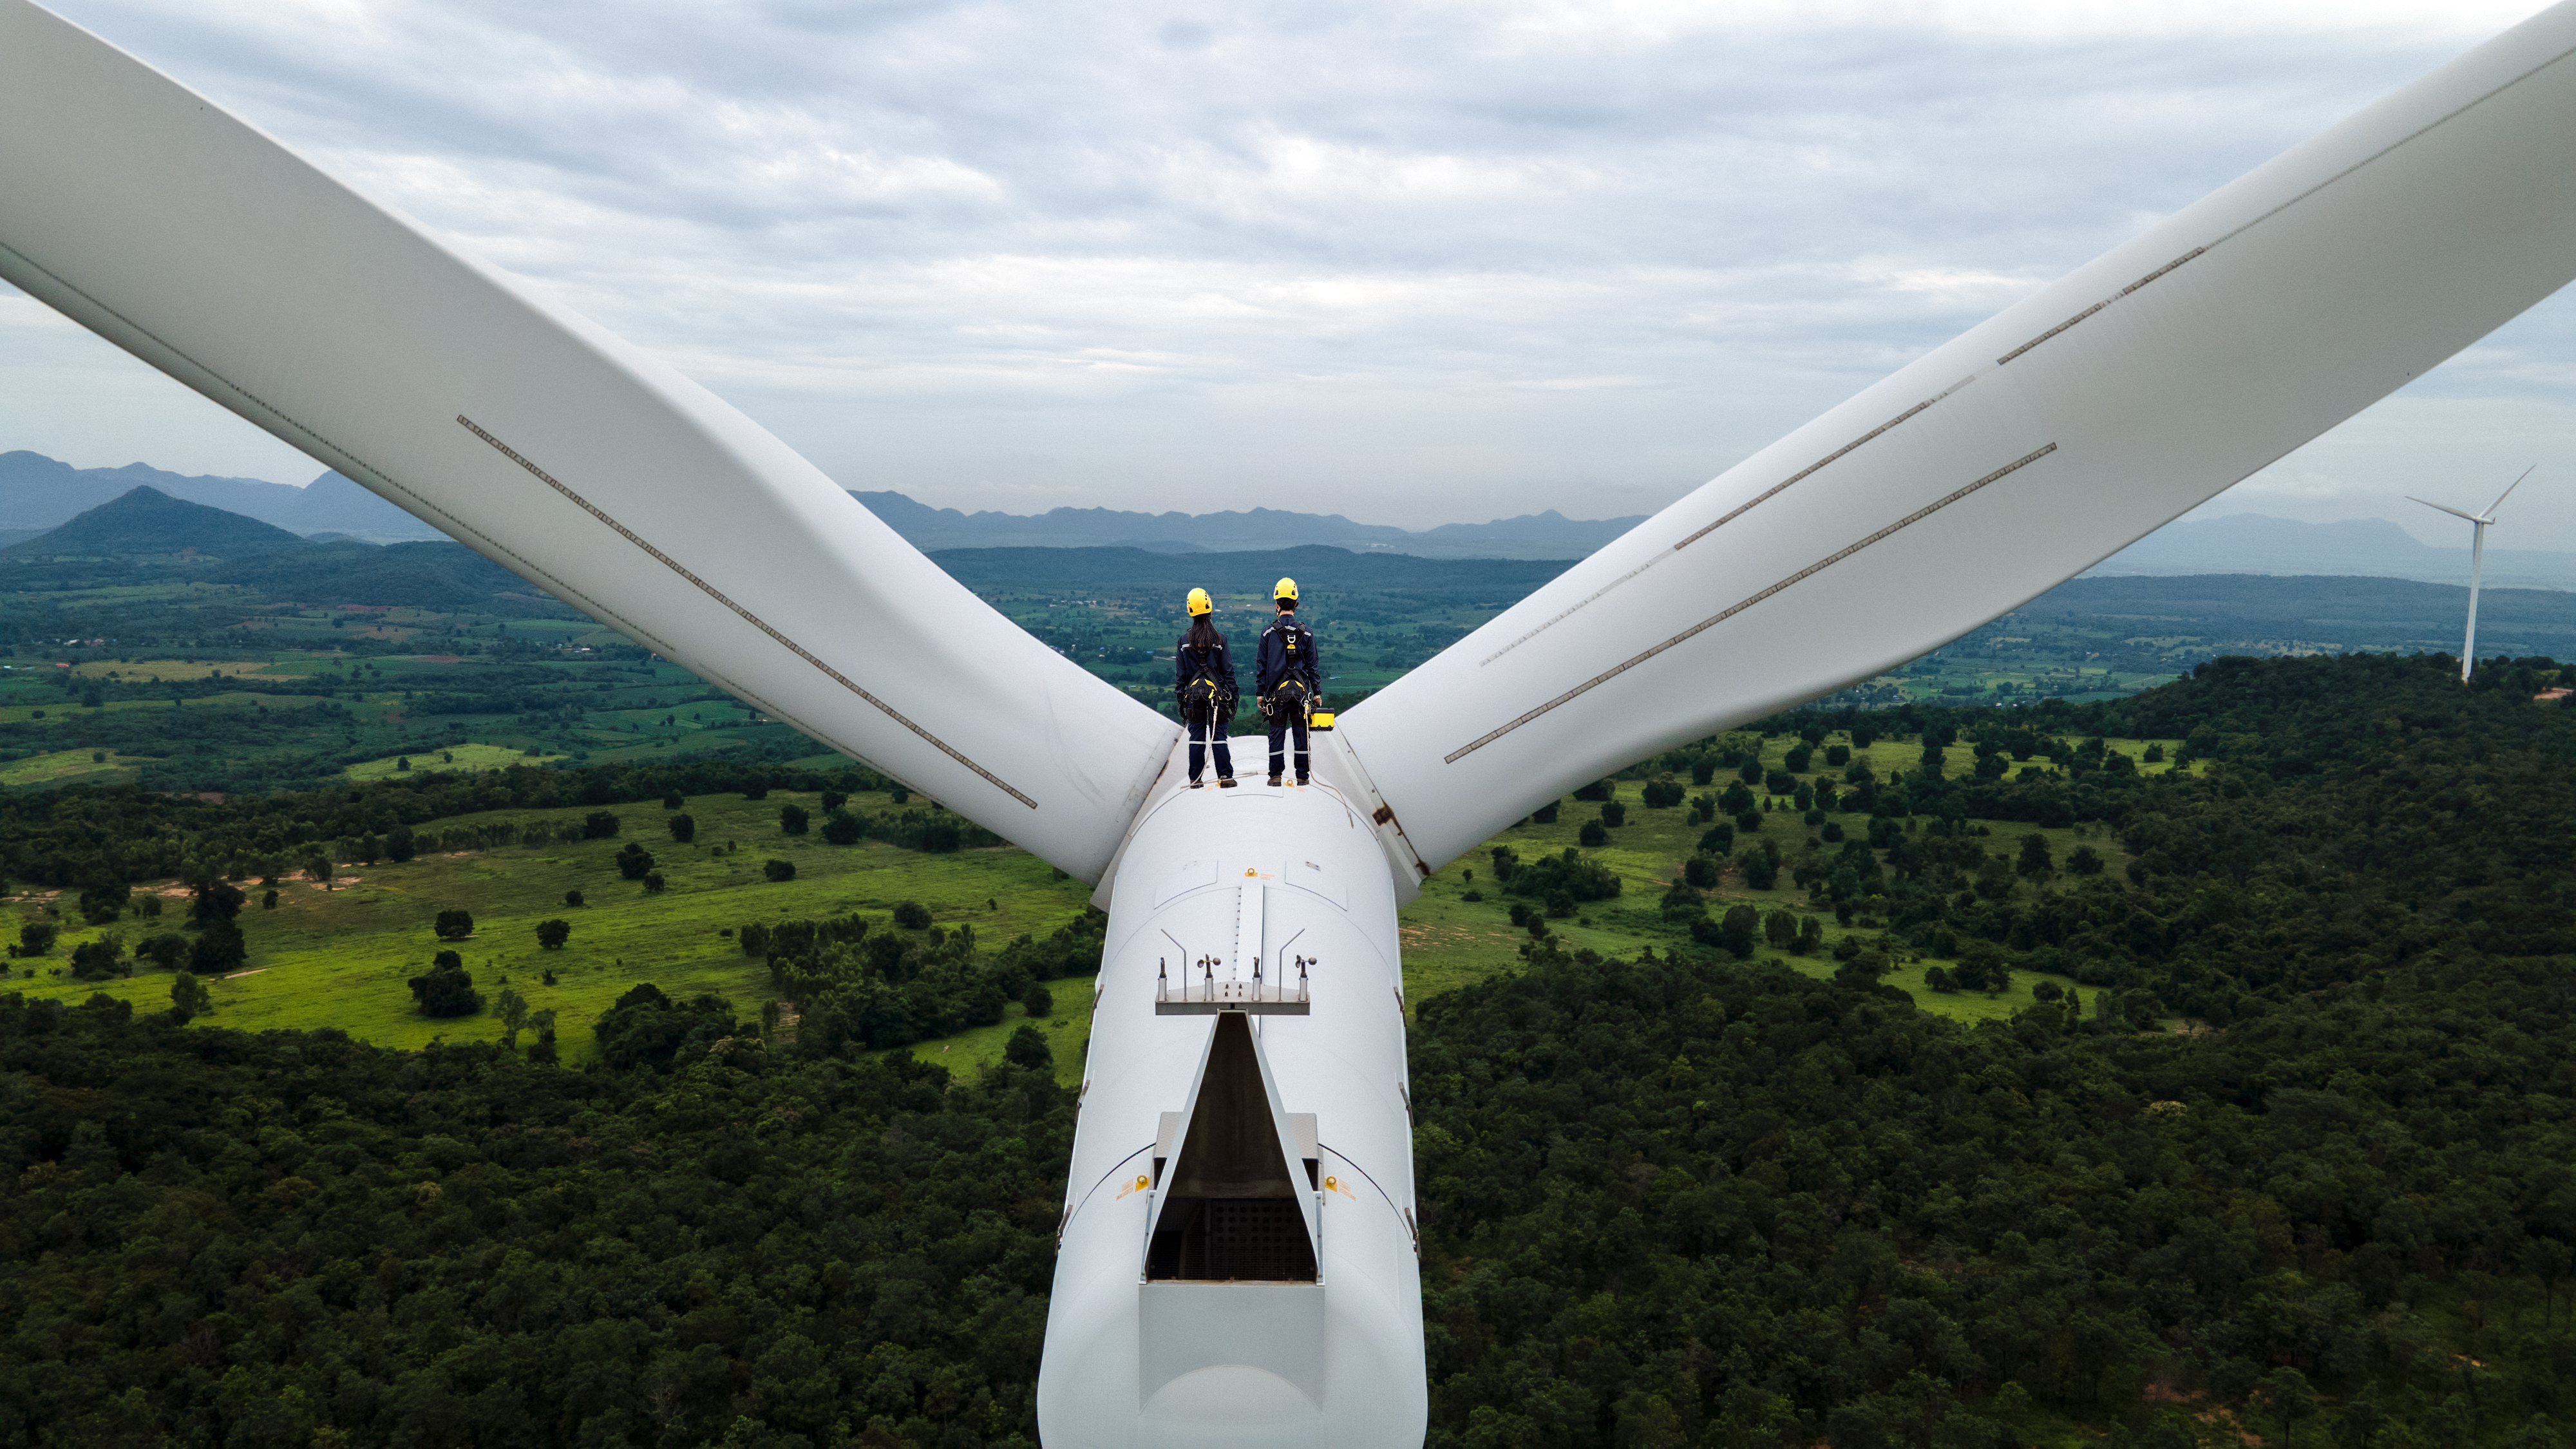 Two Electric engineer wearing Personal protective equipment working on top of wind turbine farm; climate tech investor survey